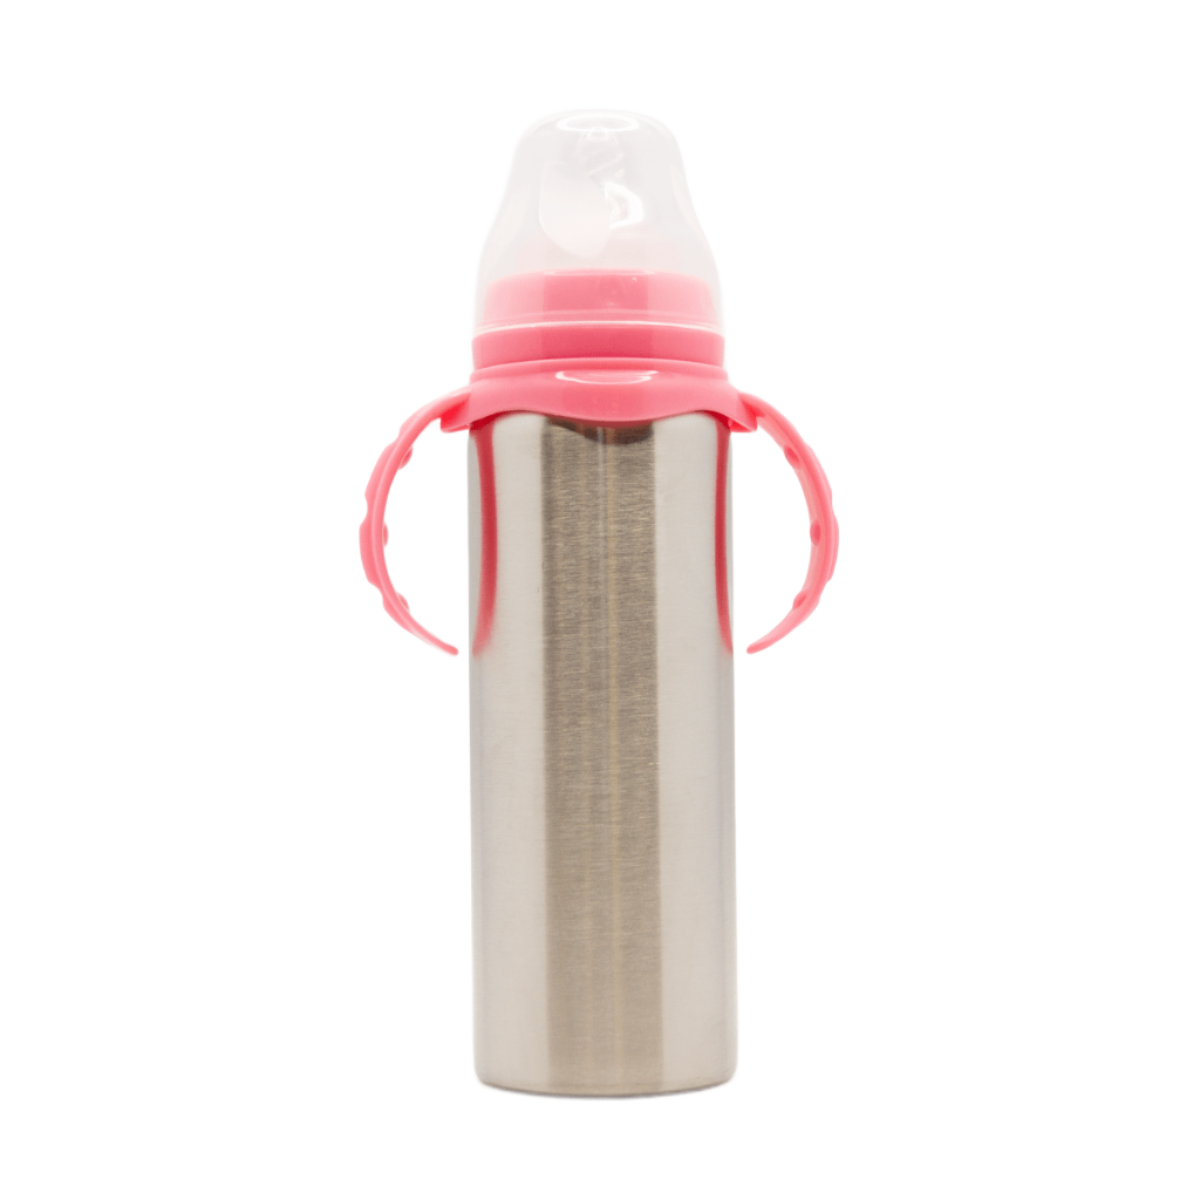 8 oz Stainless Steel Pink Baby Bottle